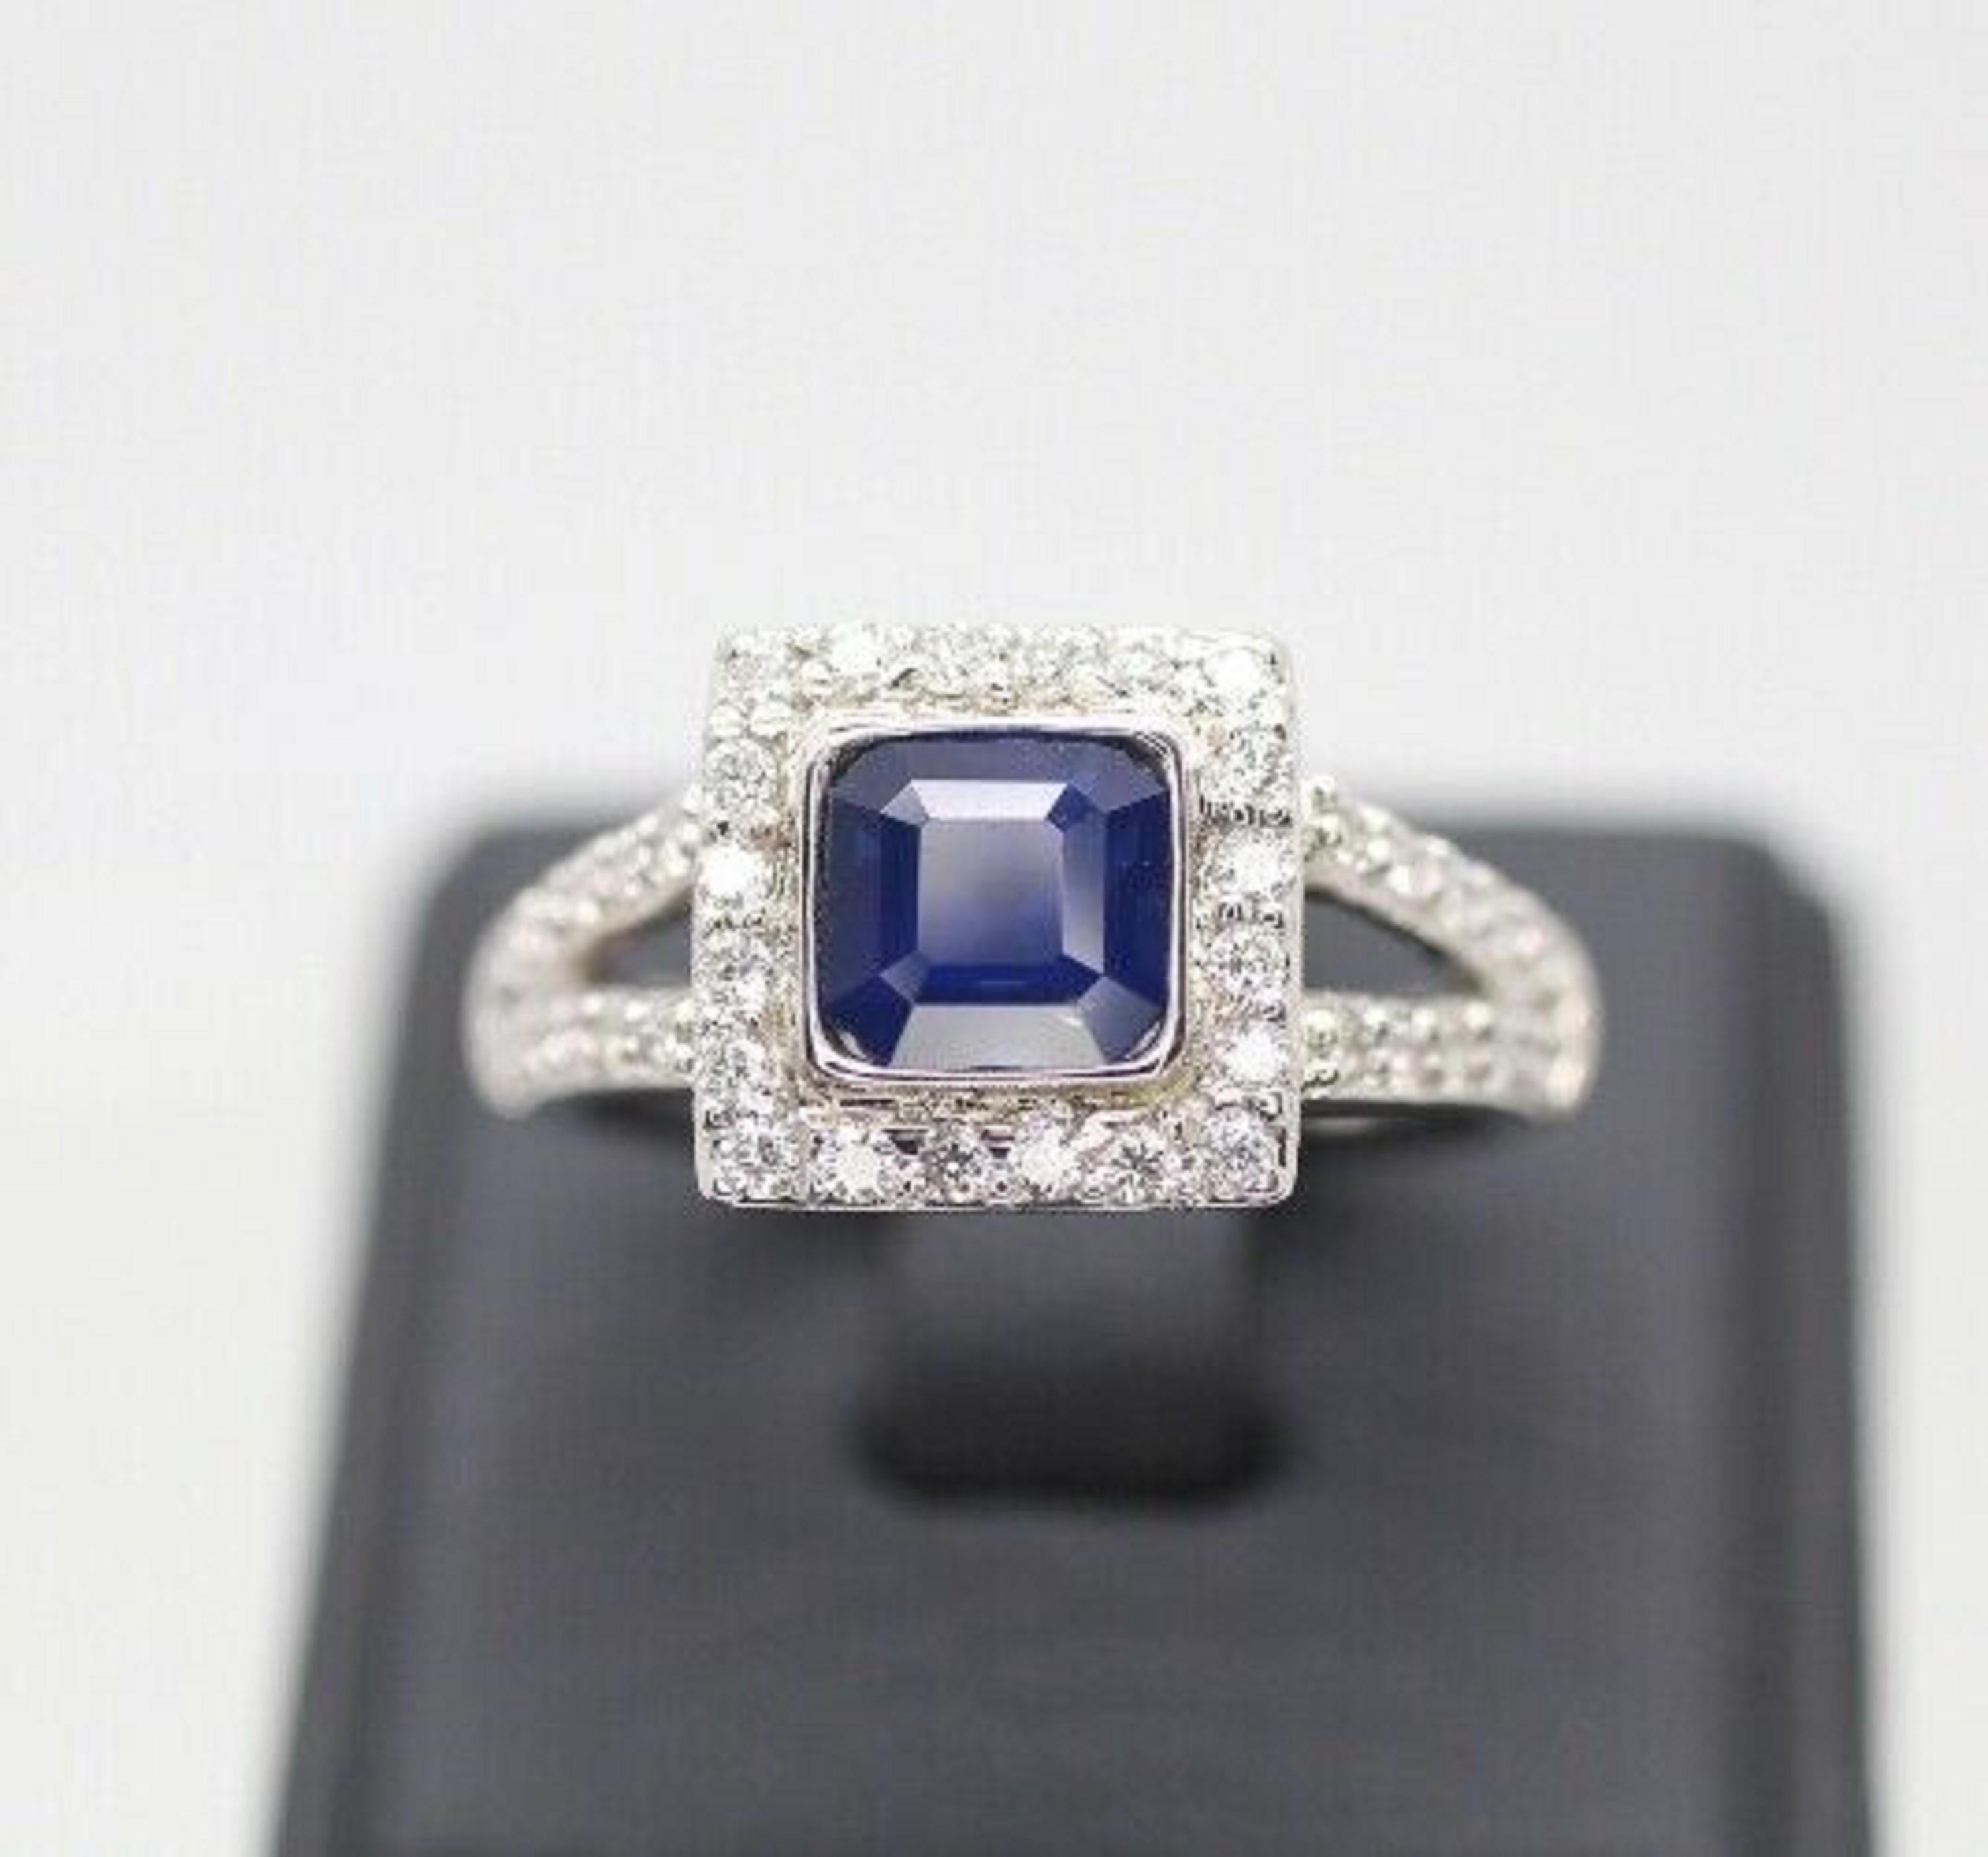   The simplicity of the ring that makes it so spectacular. It is a very nice 6.7mm asscher cut blue sapphire color. The halo consists of fully cut round diamonds that frame the sapphire perfectly. There are another 20 pieces diamonds on each side in